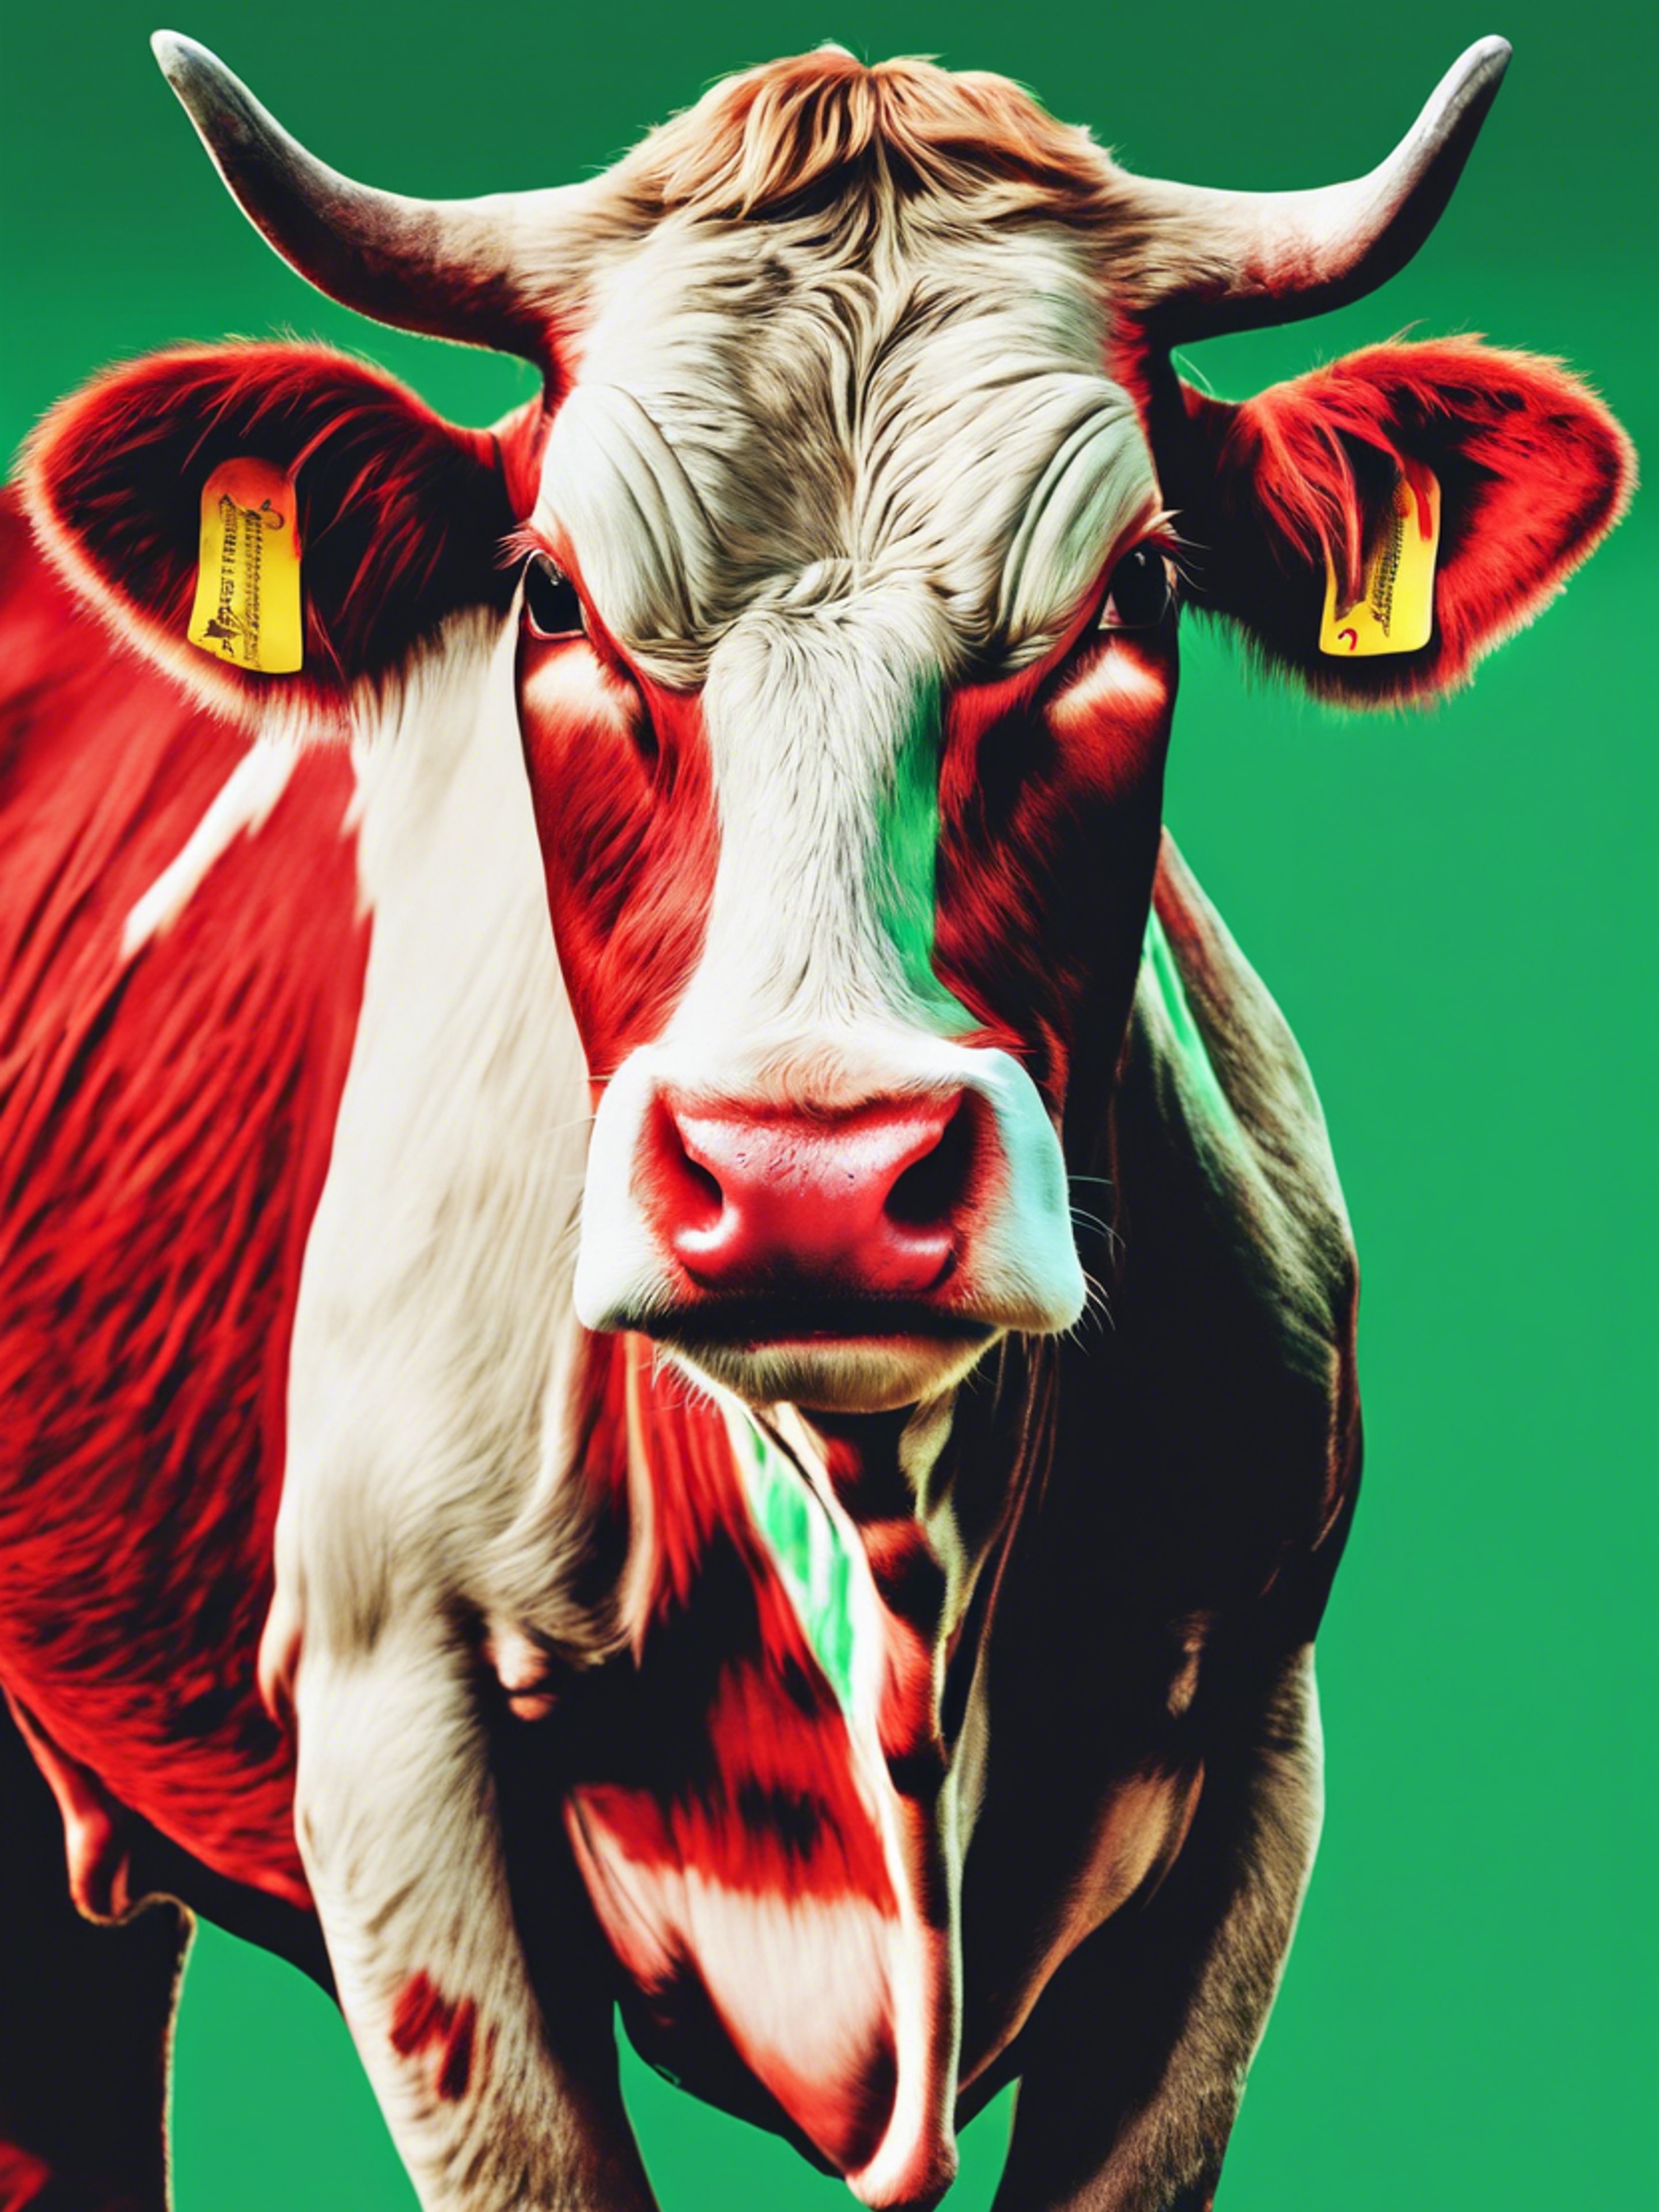 Pop-art style cow print in a palette of red and green. Tapeta[5b65906f2b9649418c8c]